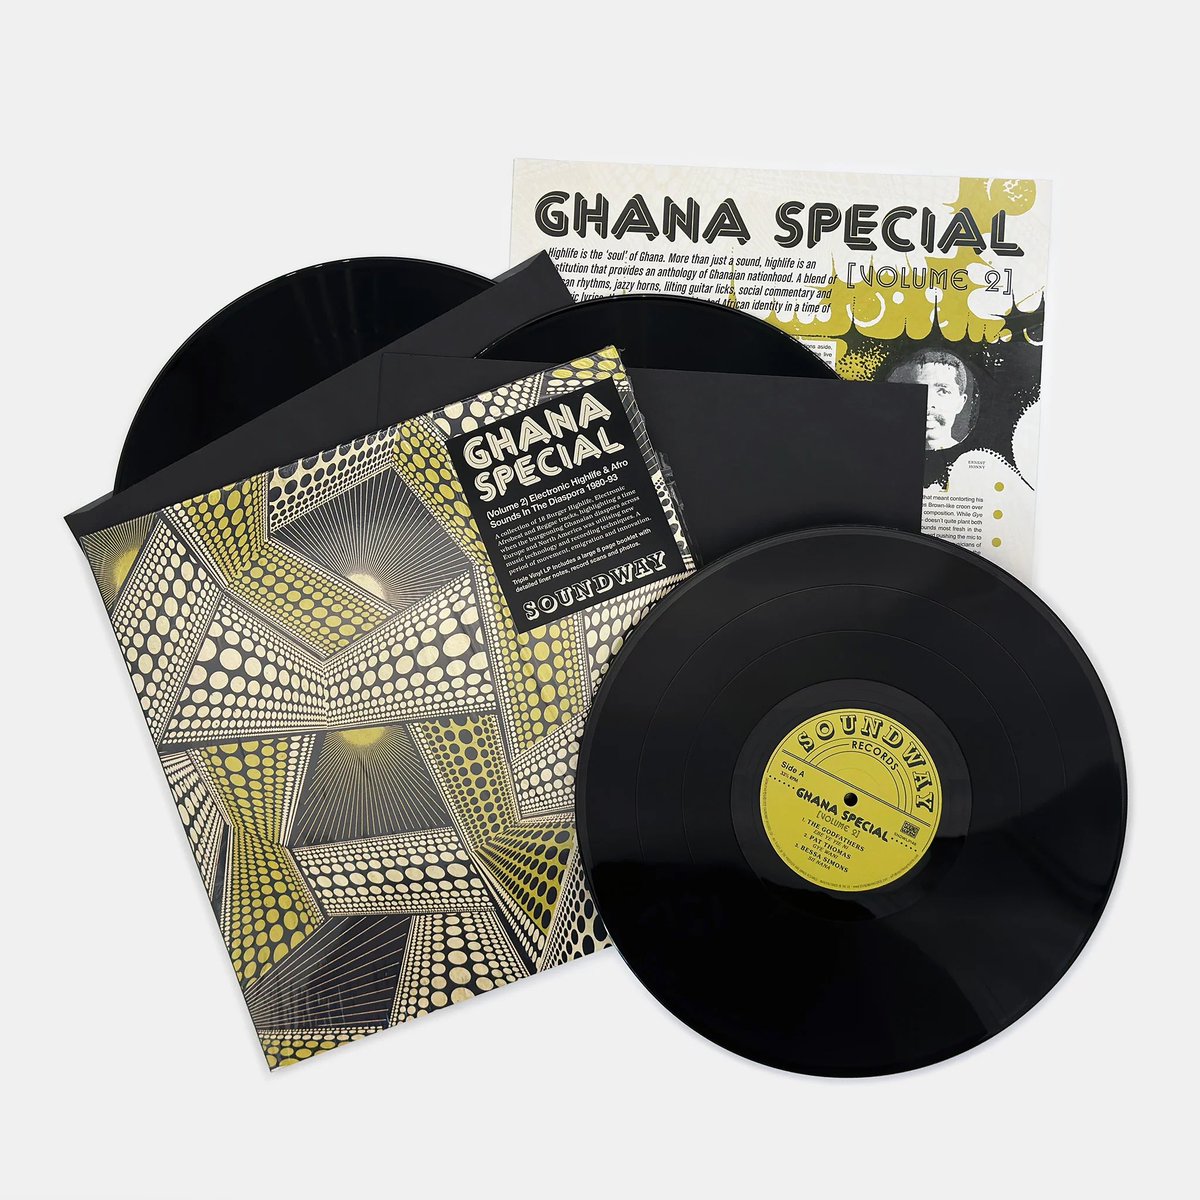 If the narrative around vinyl prices is that £35 - £45 is the new norm for a single LP in 2024 as many labels would have you believe & we should all put up or shut up then how come you can get stunning items like this just released Ghana Special TRIPLE LP on Soundway for just £25